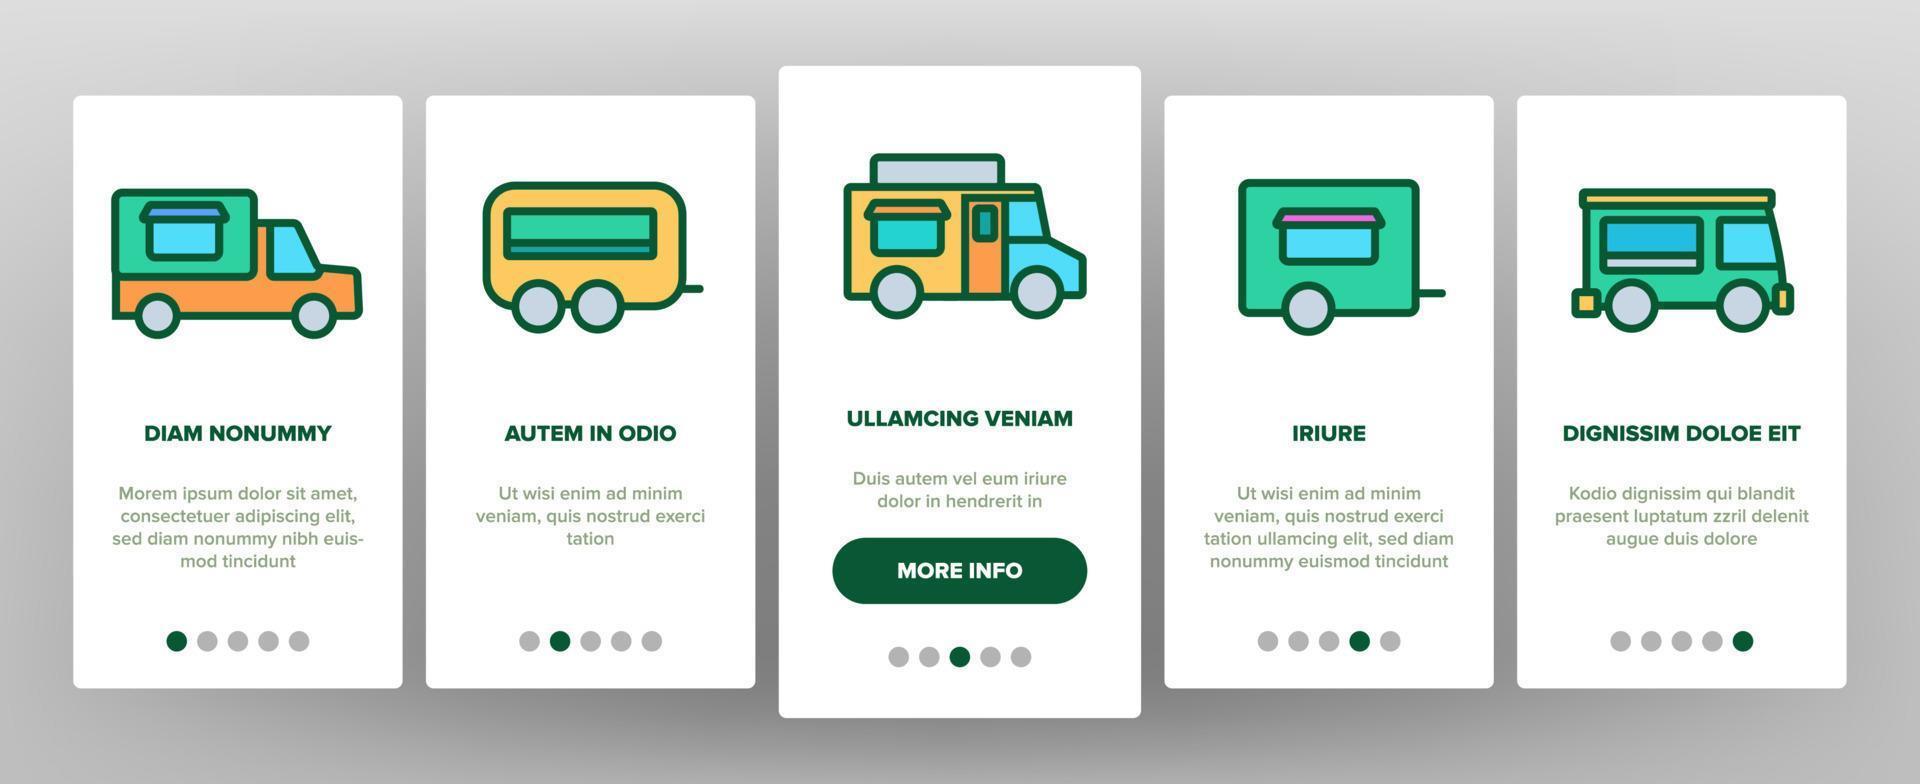 Food Truck Transport Onboarding Icons Set Vector